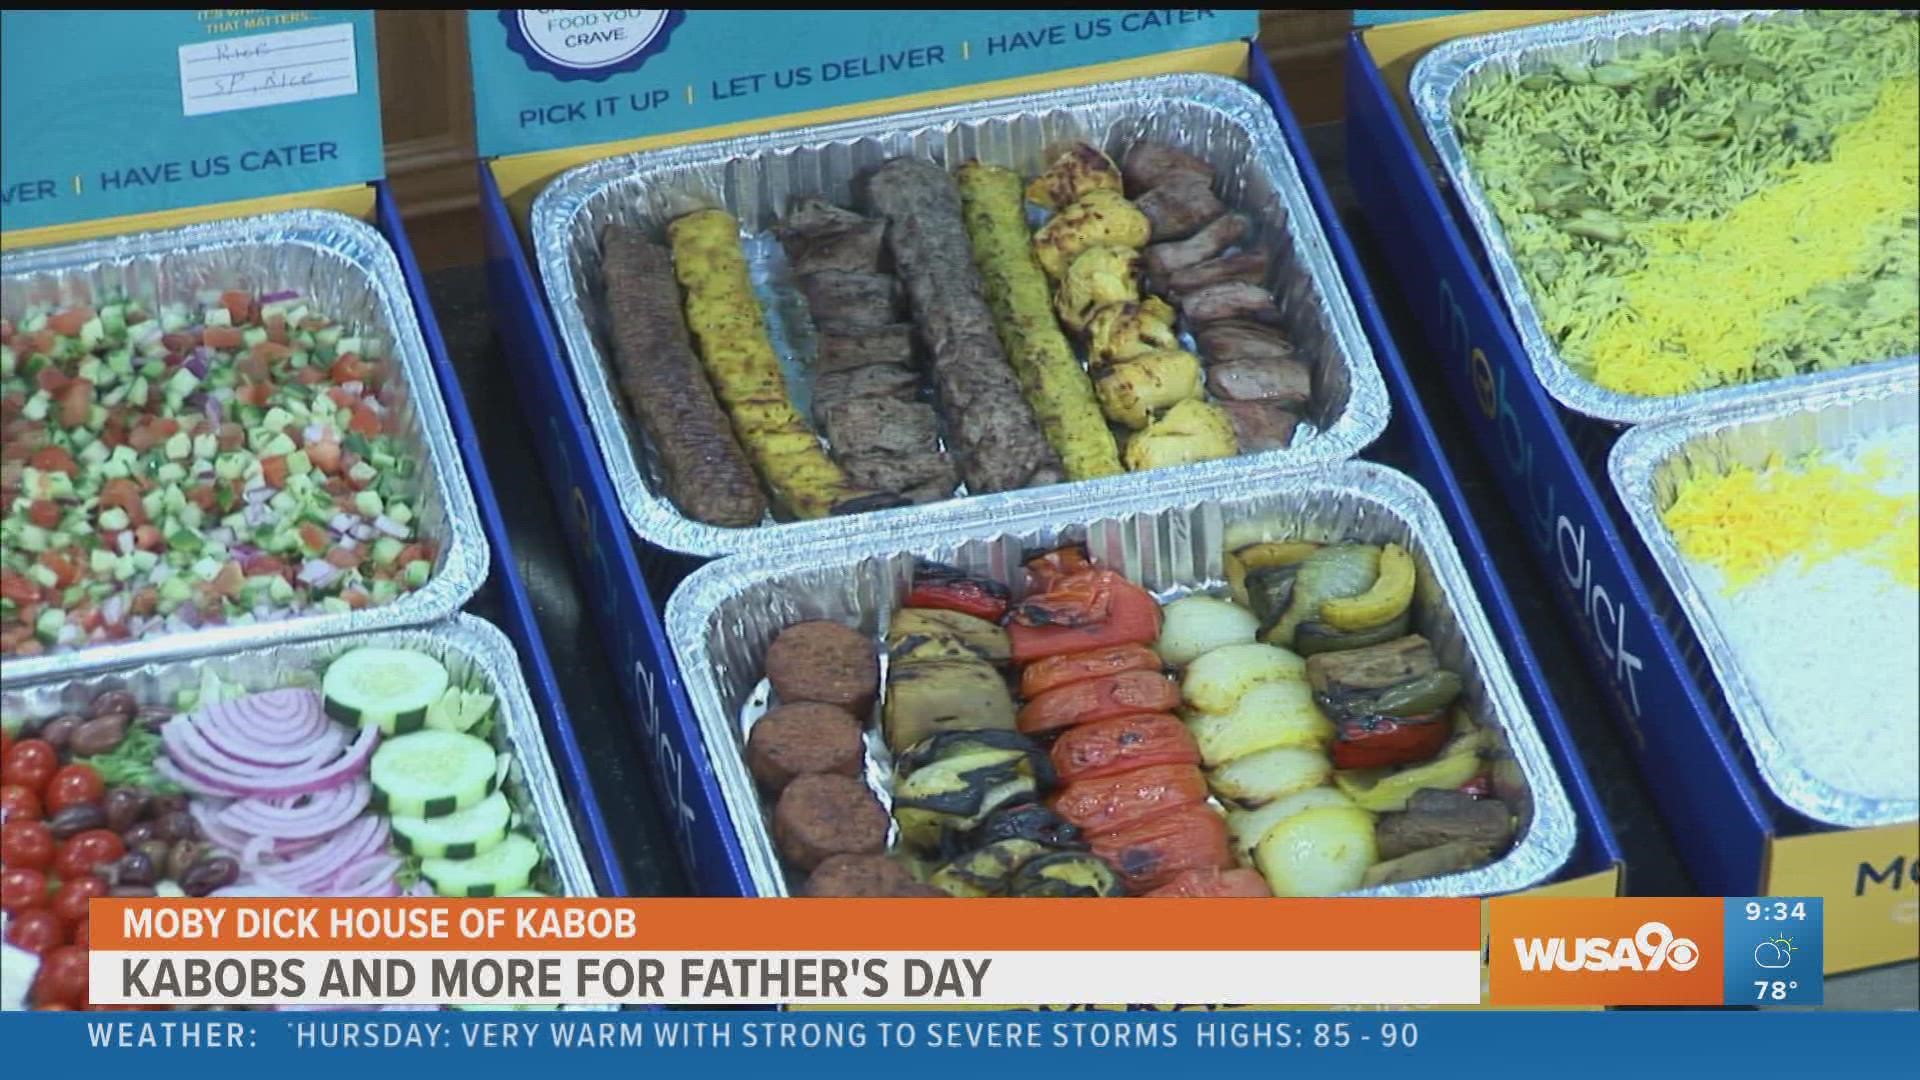 Moby Dick House of Kabob COO, Alex Momeni, shows us how to marinade, prepare and cook delicious kabobs for Father's Day.